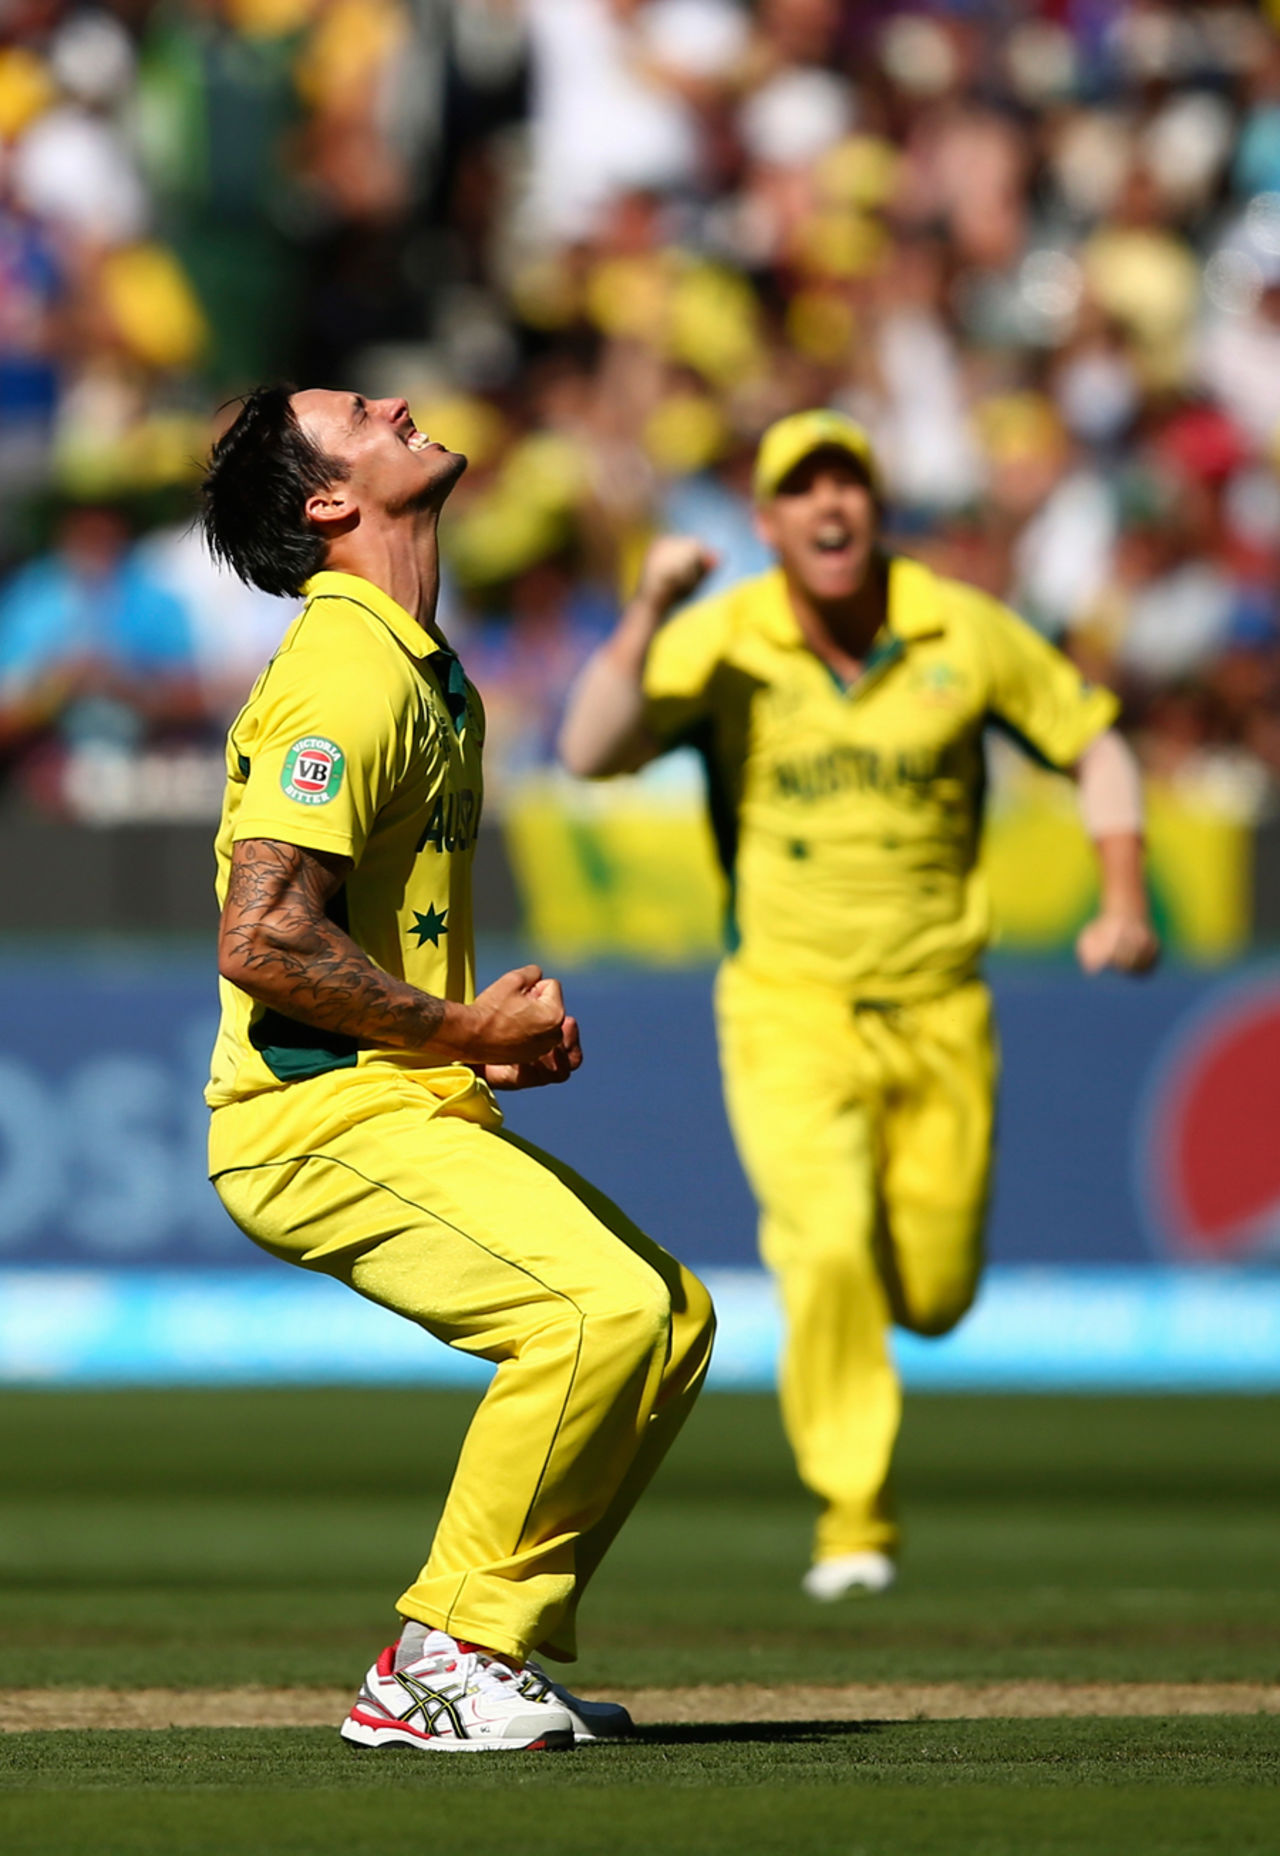 Mitchell Johnson is pumped up after getting Kane Williamson caught and bowled, Australia v New Zealand, World Cup 2015, final, Melbourne, March 29, 2015